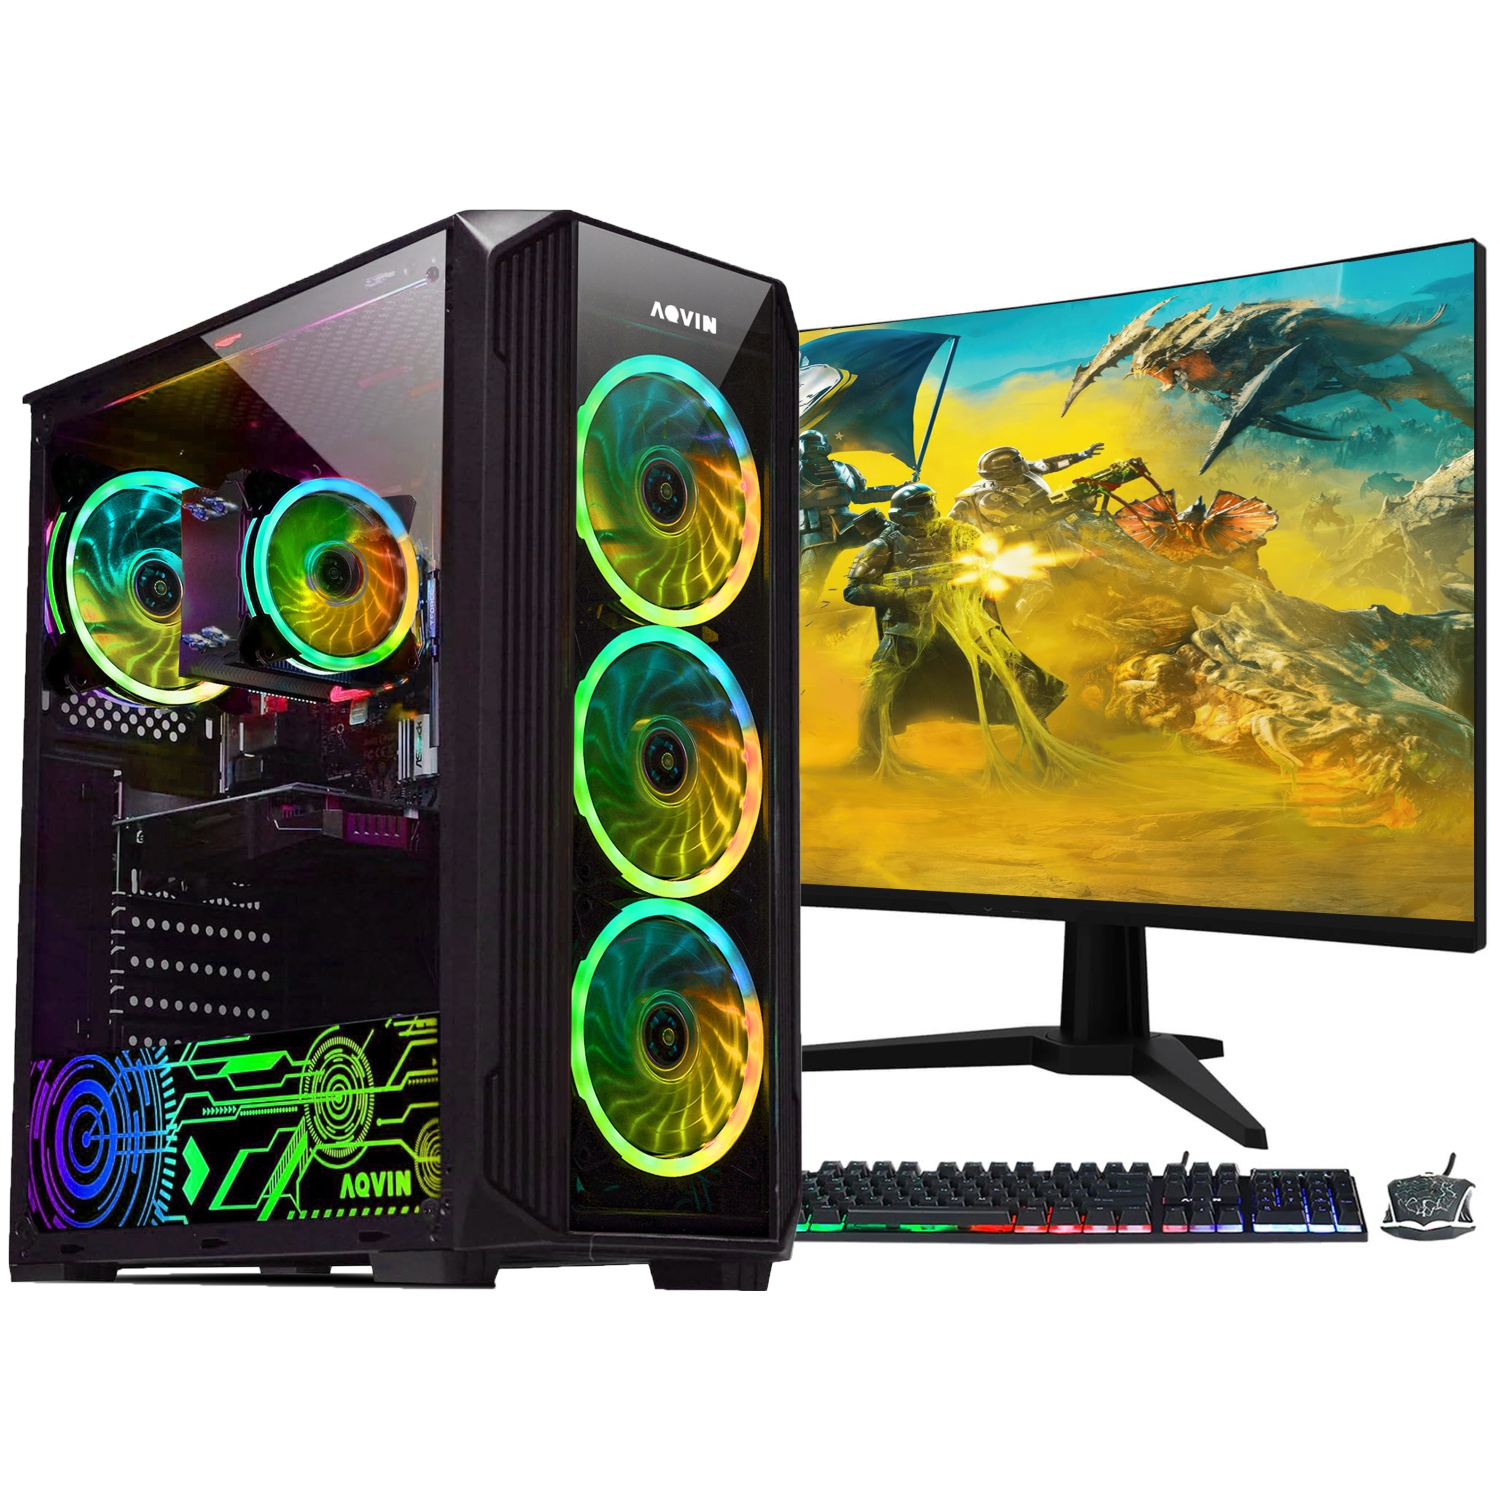 Refurbished (Excellent) AQVIN Gaming PC Desktop Computer Tower (Core i7/2TB (fast boot) SSD/32GB RAM/RTX 3060 12GB/WIN 10 Pro) New 27 inch Curved Gaming Monitor - Only at Best Buy